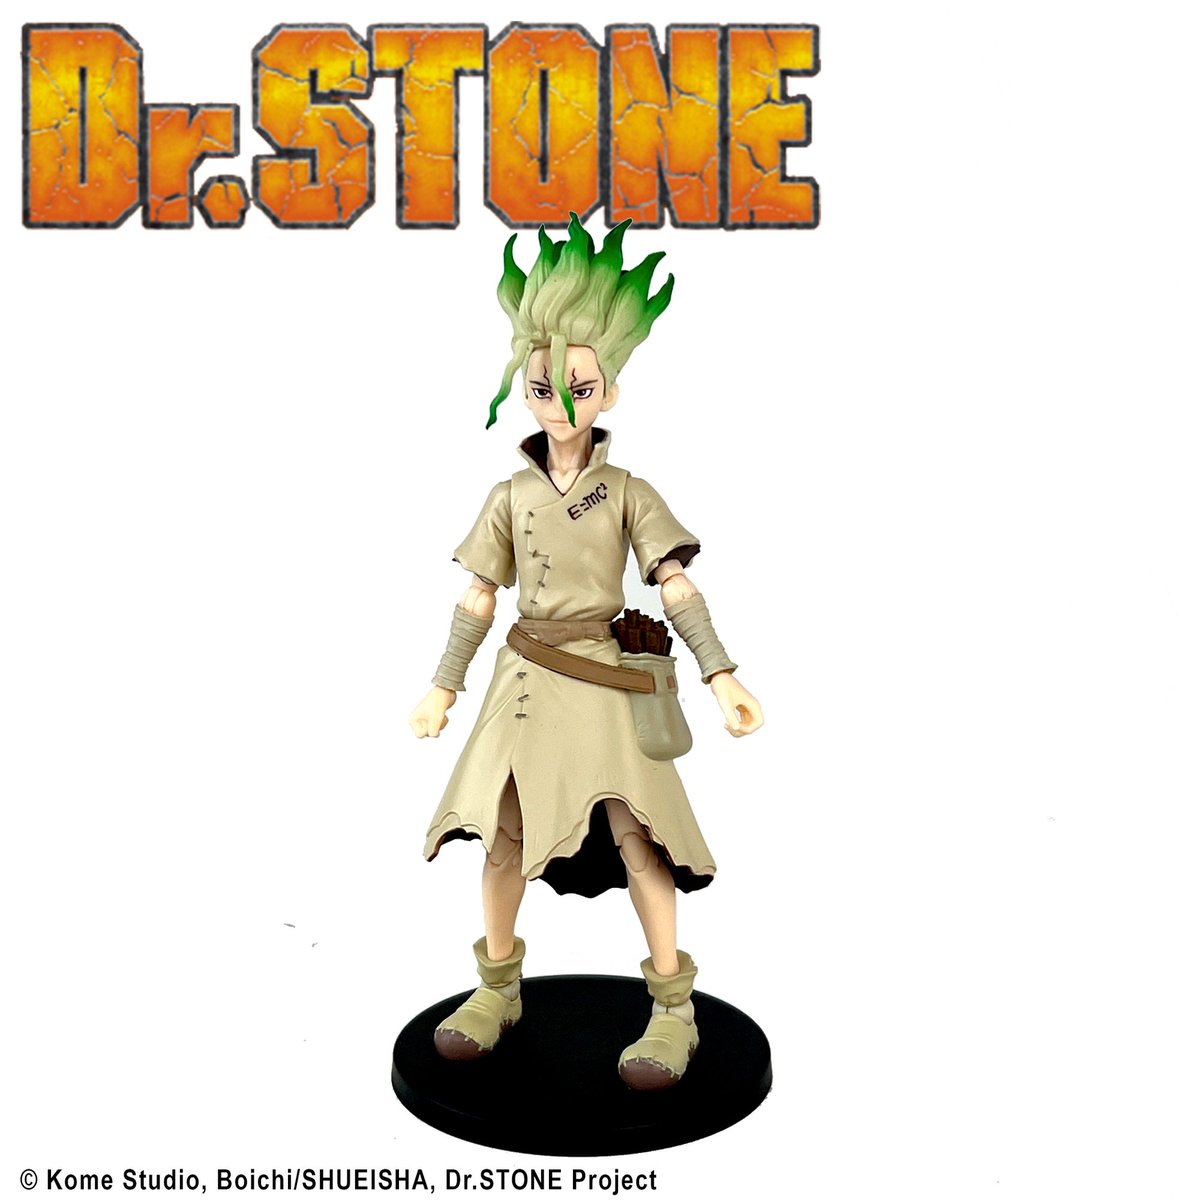 Dive into adventure with Dr. STONE action figures! Senku's smarts, Chrome's resourcefulness, Kohaku's courage, and Gen's charm – all ready for play. Don't miss out – get yours today! tinyurl.com/9hx8v43e #DrSTONE #ActionFigures #Anime'